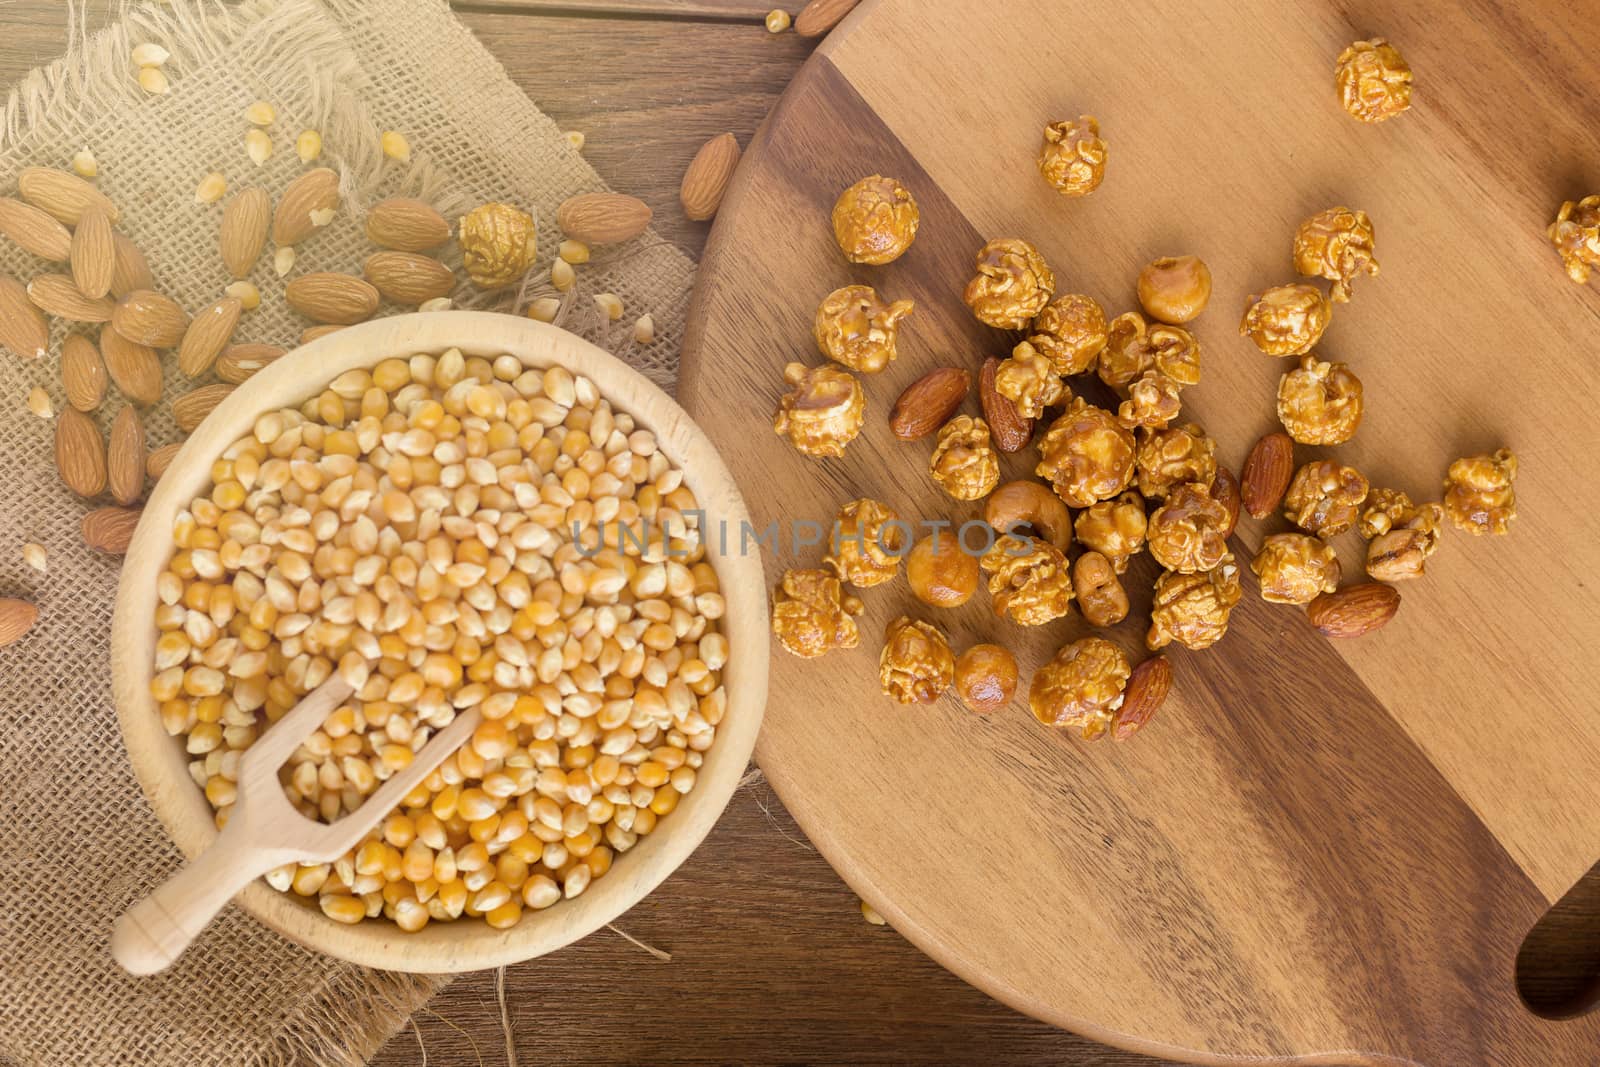 Corn kernels in wooden plates and popcorn with Caramel and almond cream on wooden table.